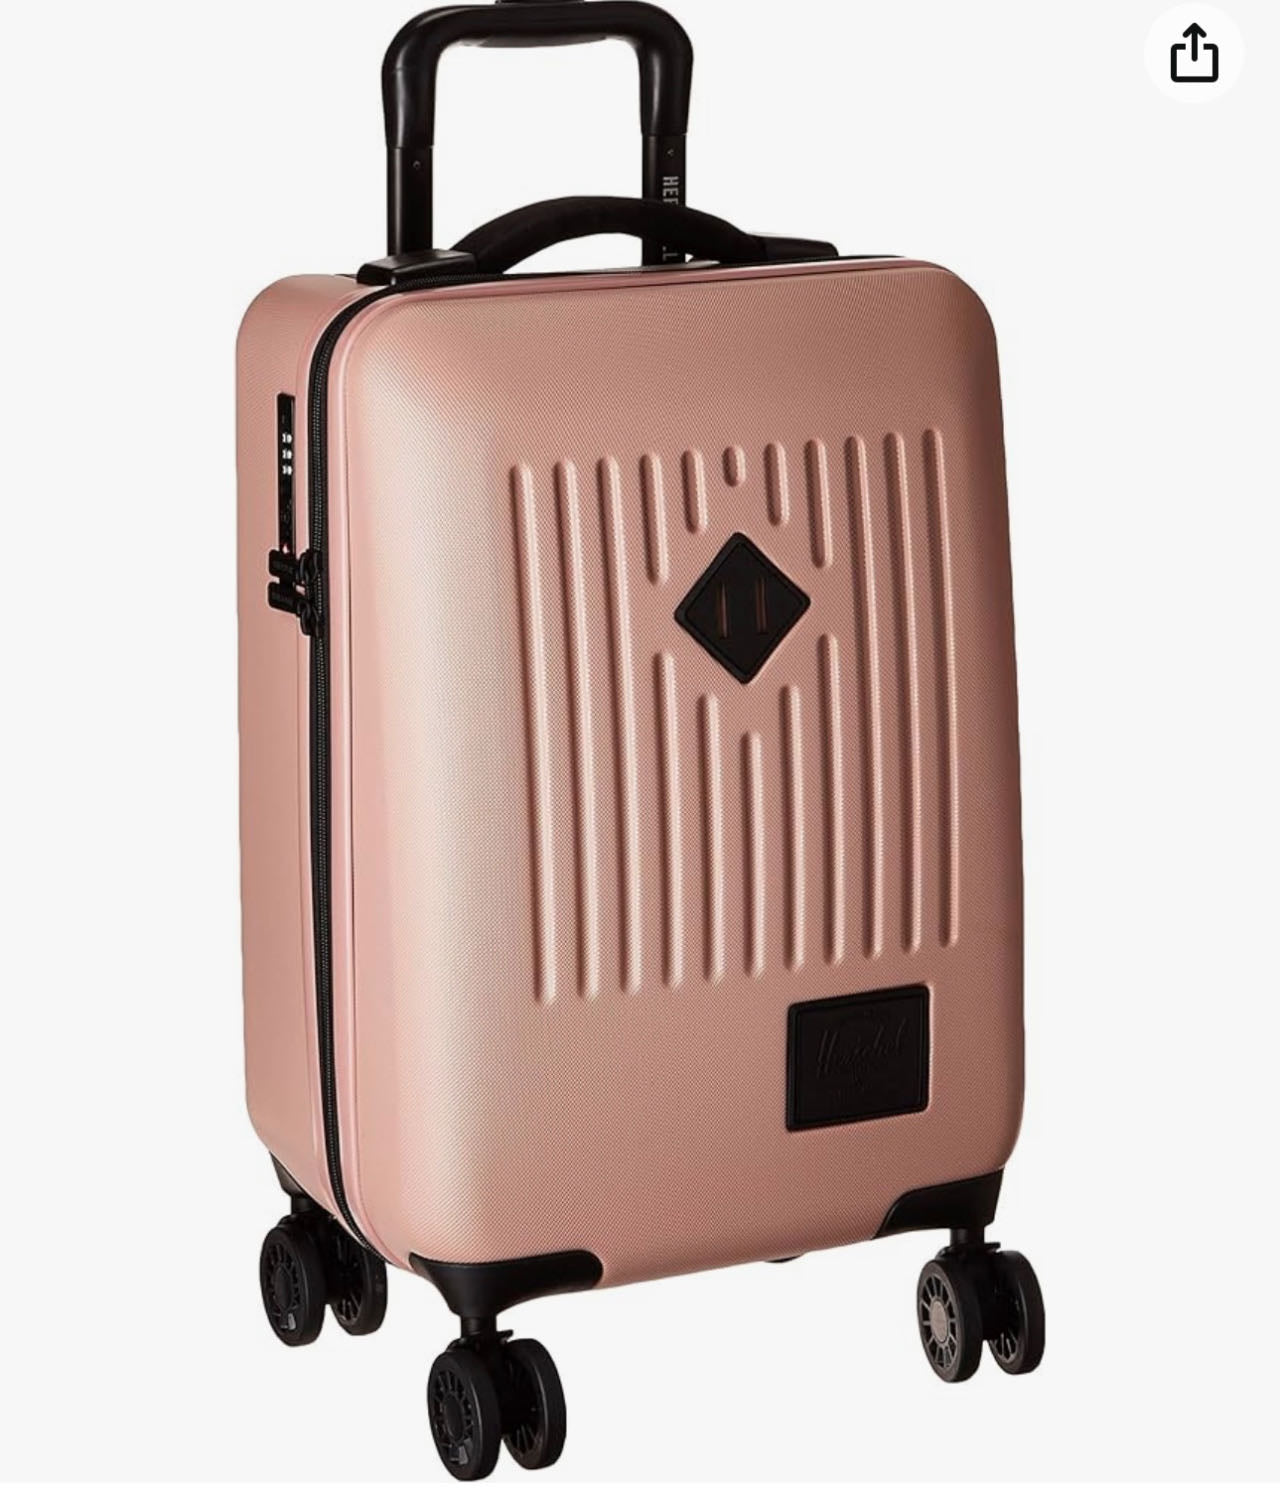 Dual ABS suitcase carry on size, 10601-01589 Pink